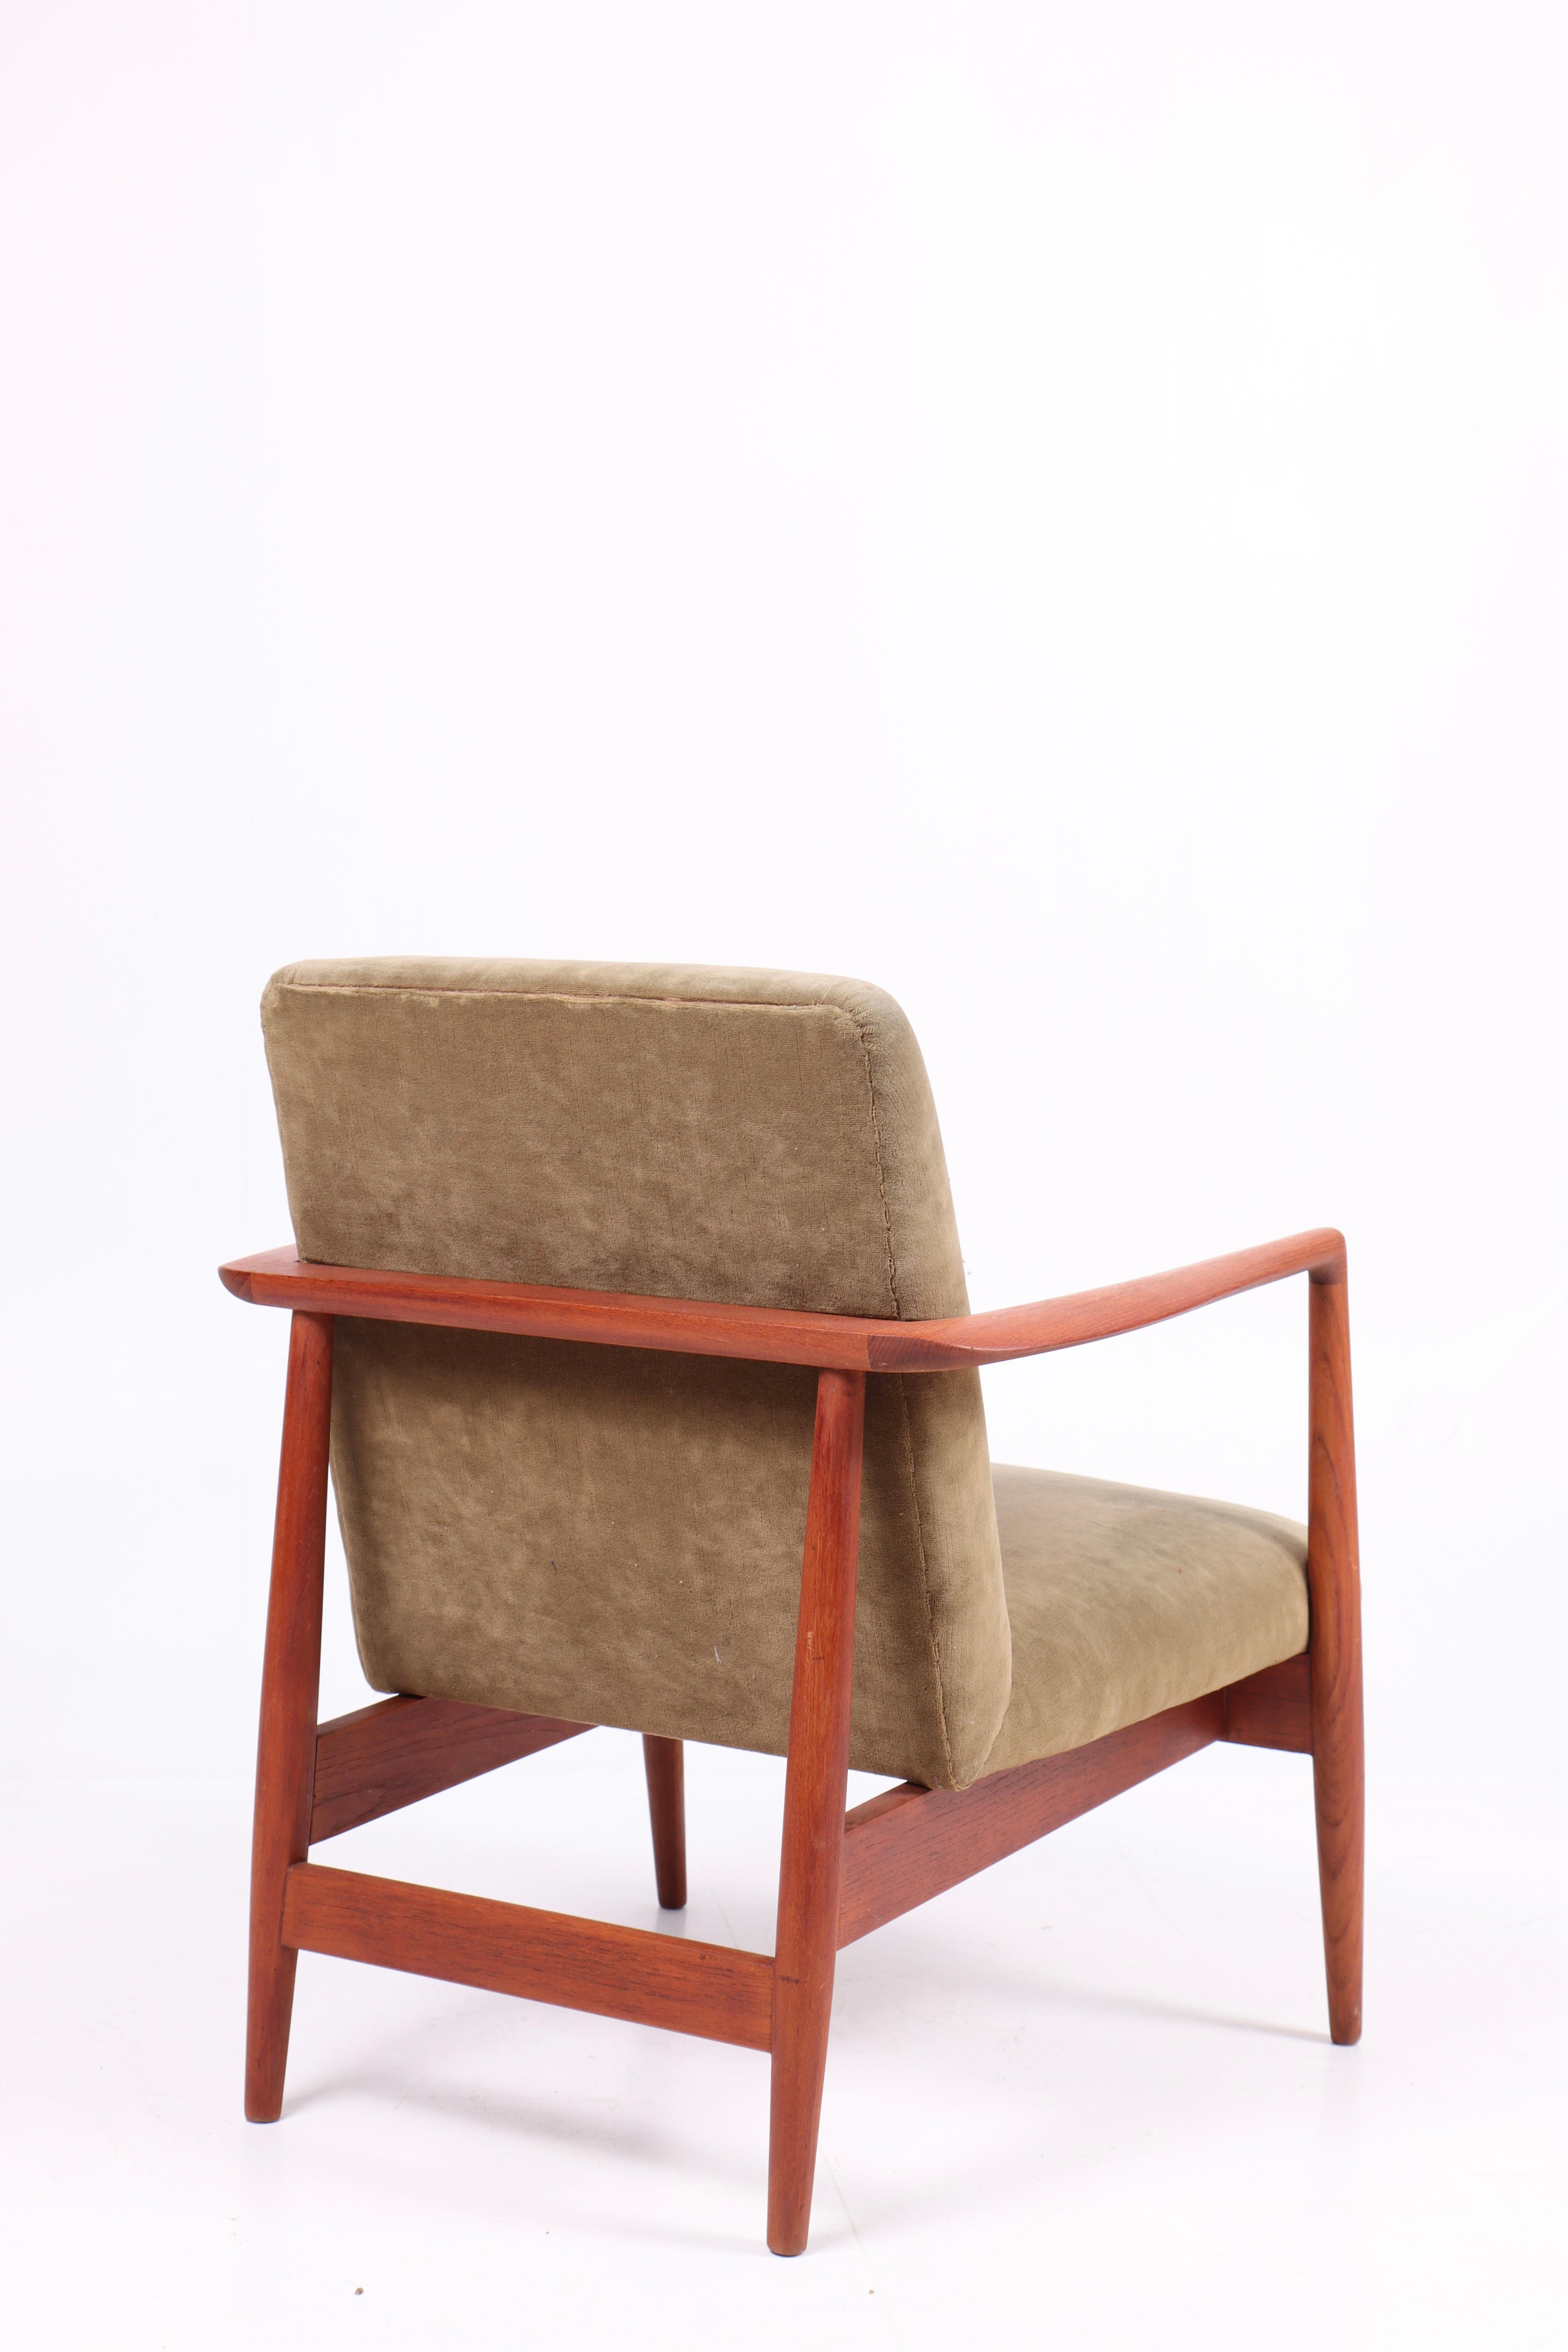 Mid-20th Century Pair of Midcentury Lounge Chairs in Teak and Velvet by C.B Hansen, 1950s For Sale